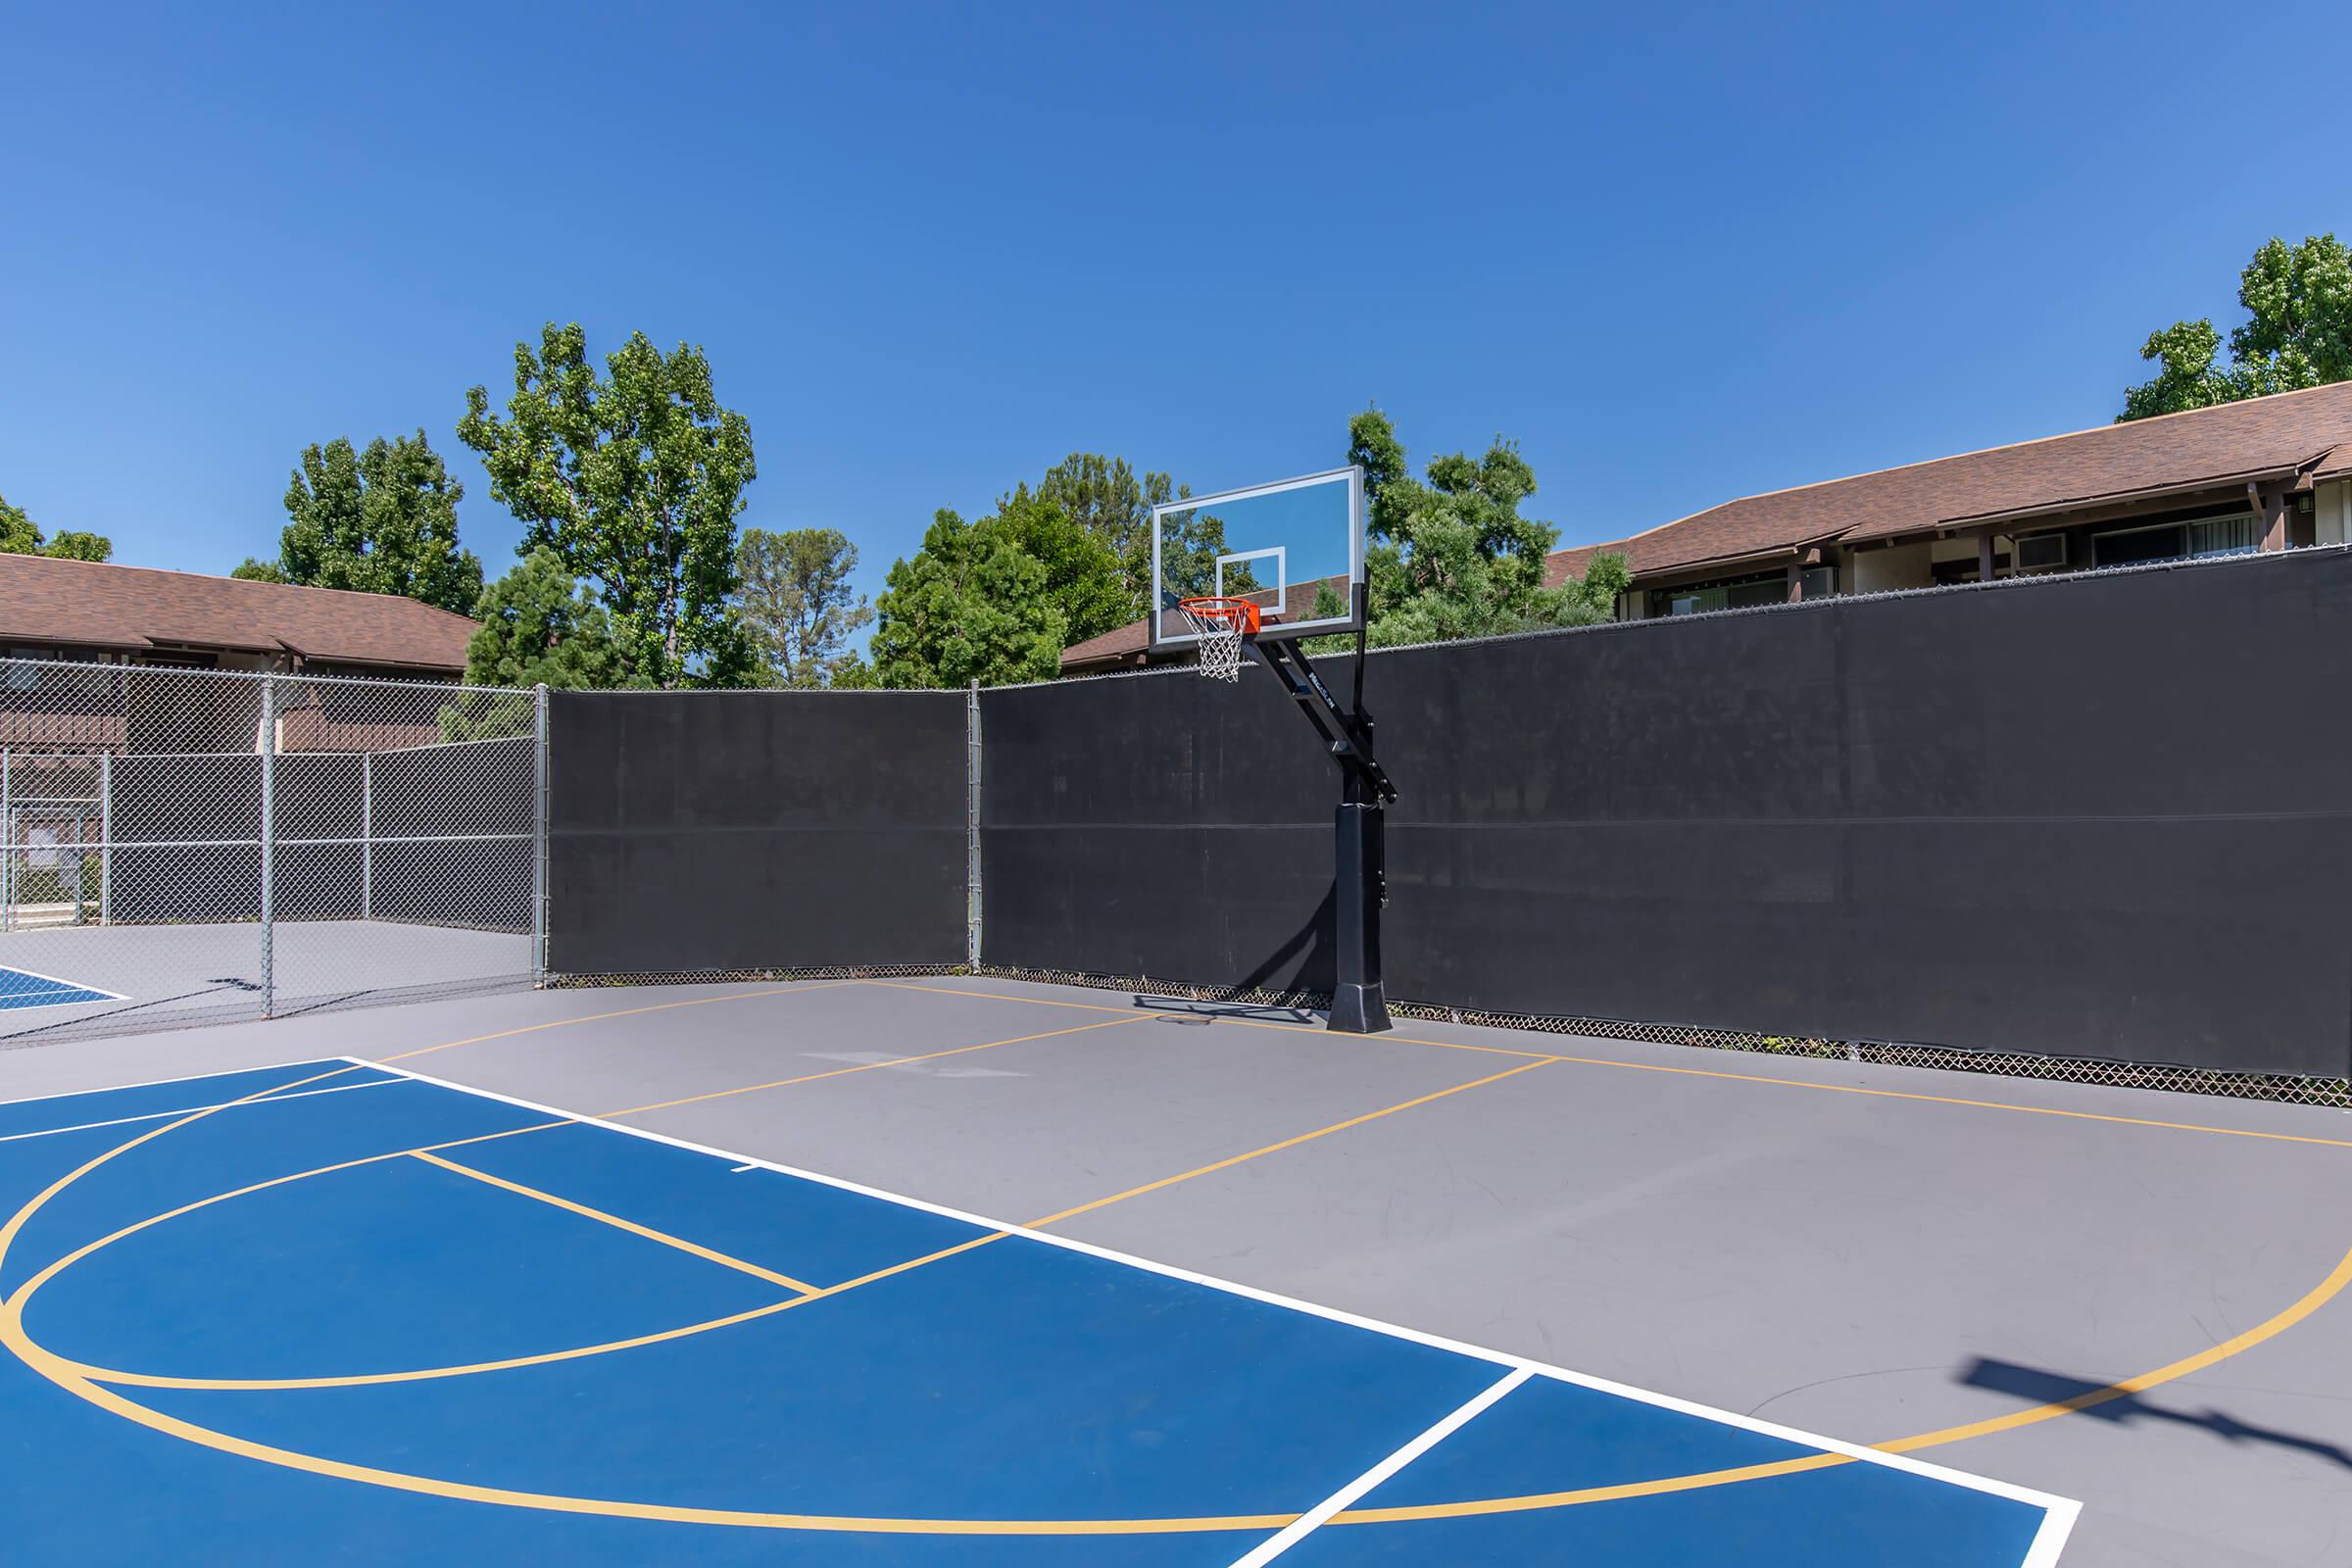 a basketball on a court with a racket